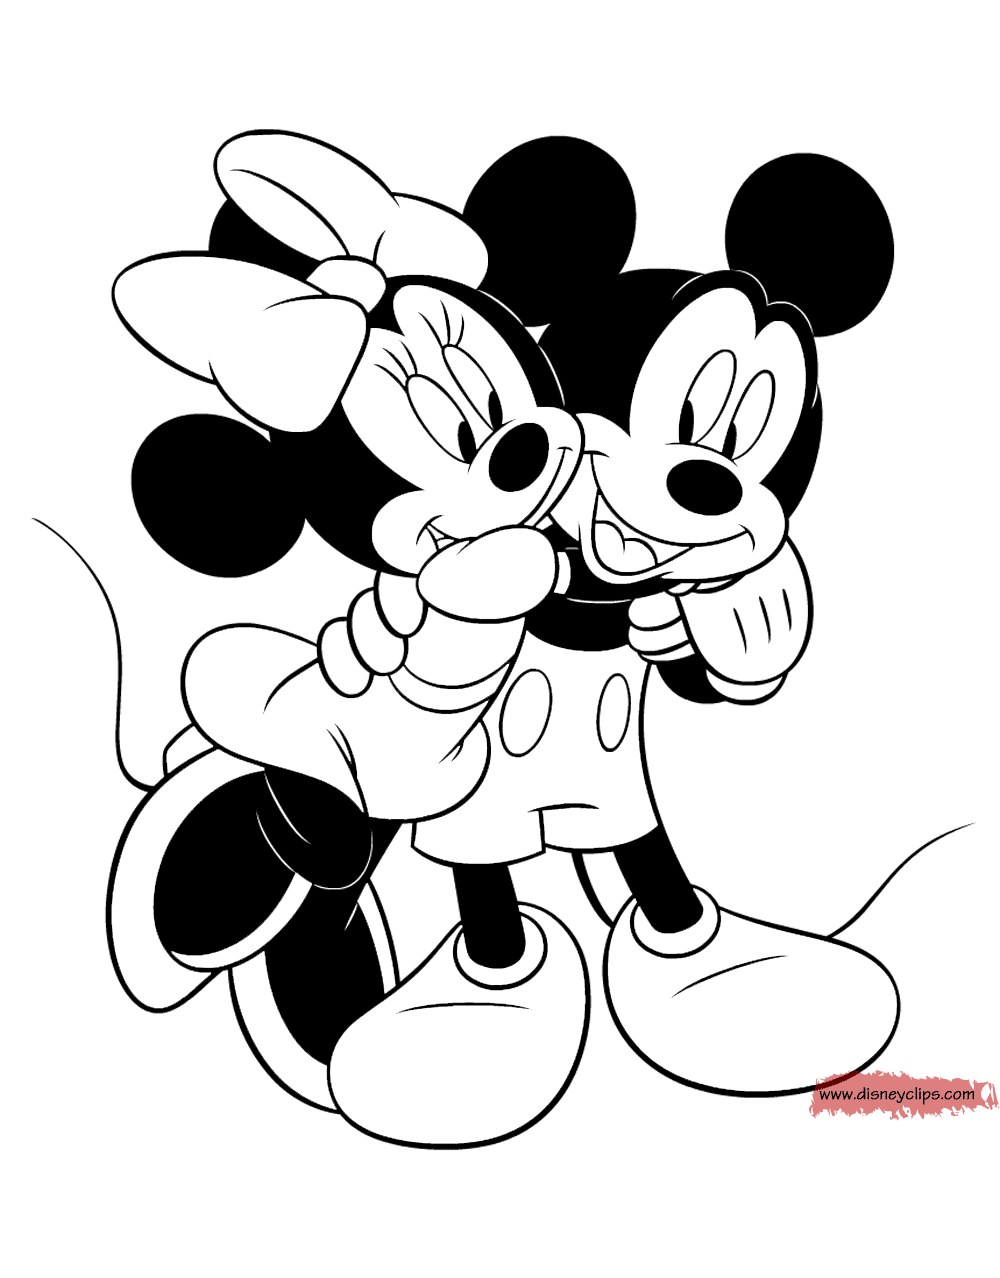 Mickey Mouse & Friends Coloring Pages Disney Coloring Book